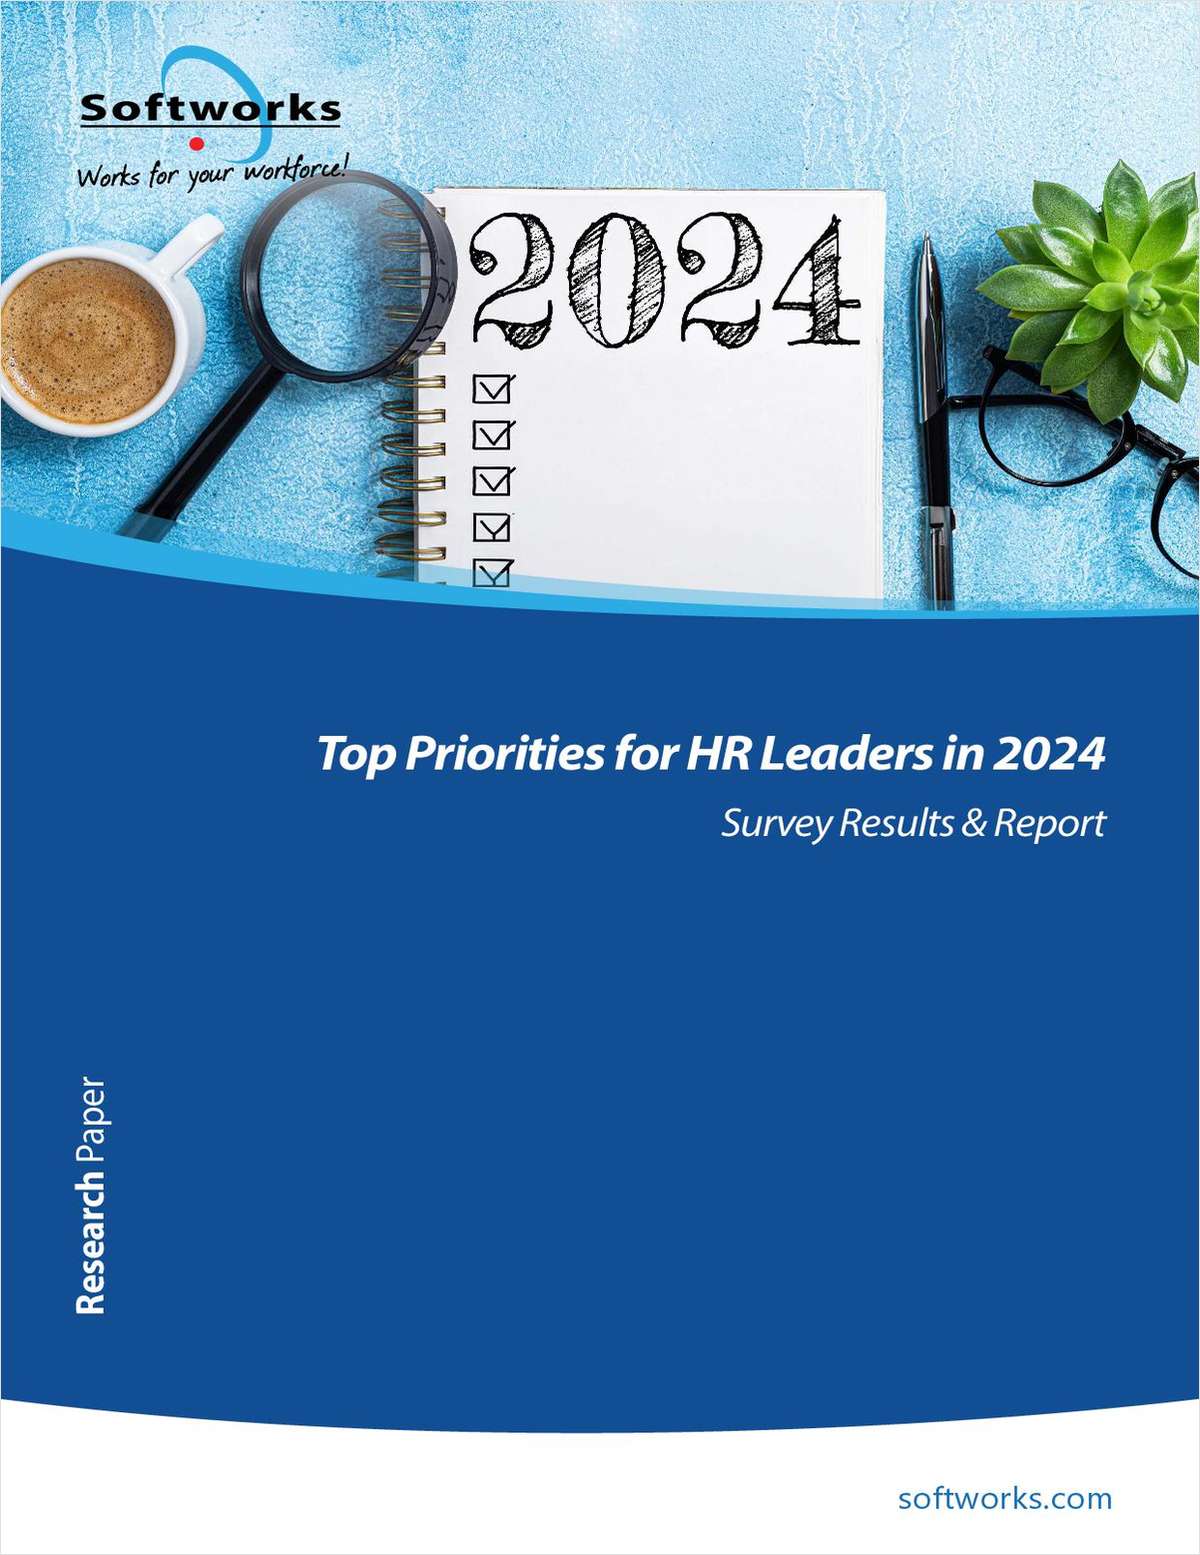 Transform your HR strategy for 2024